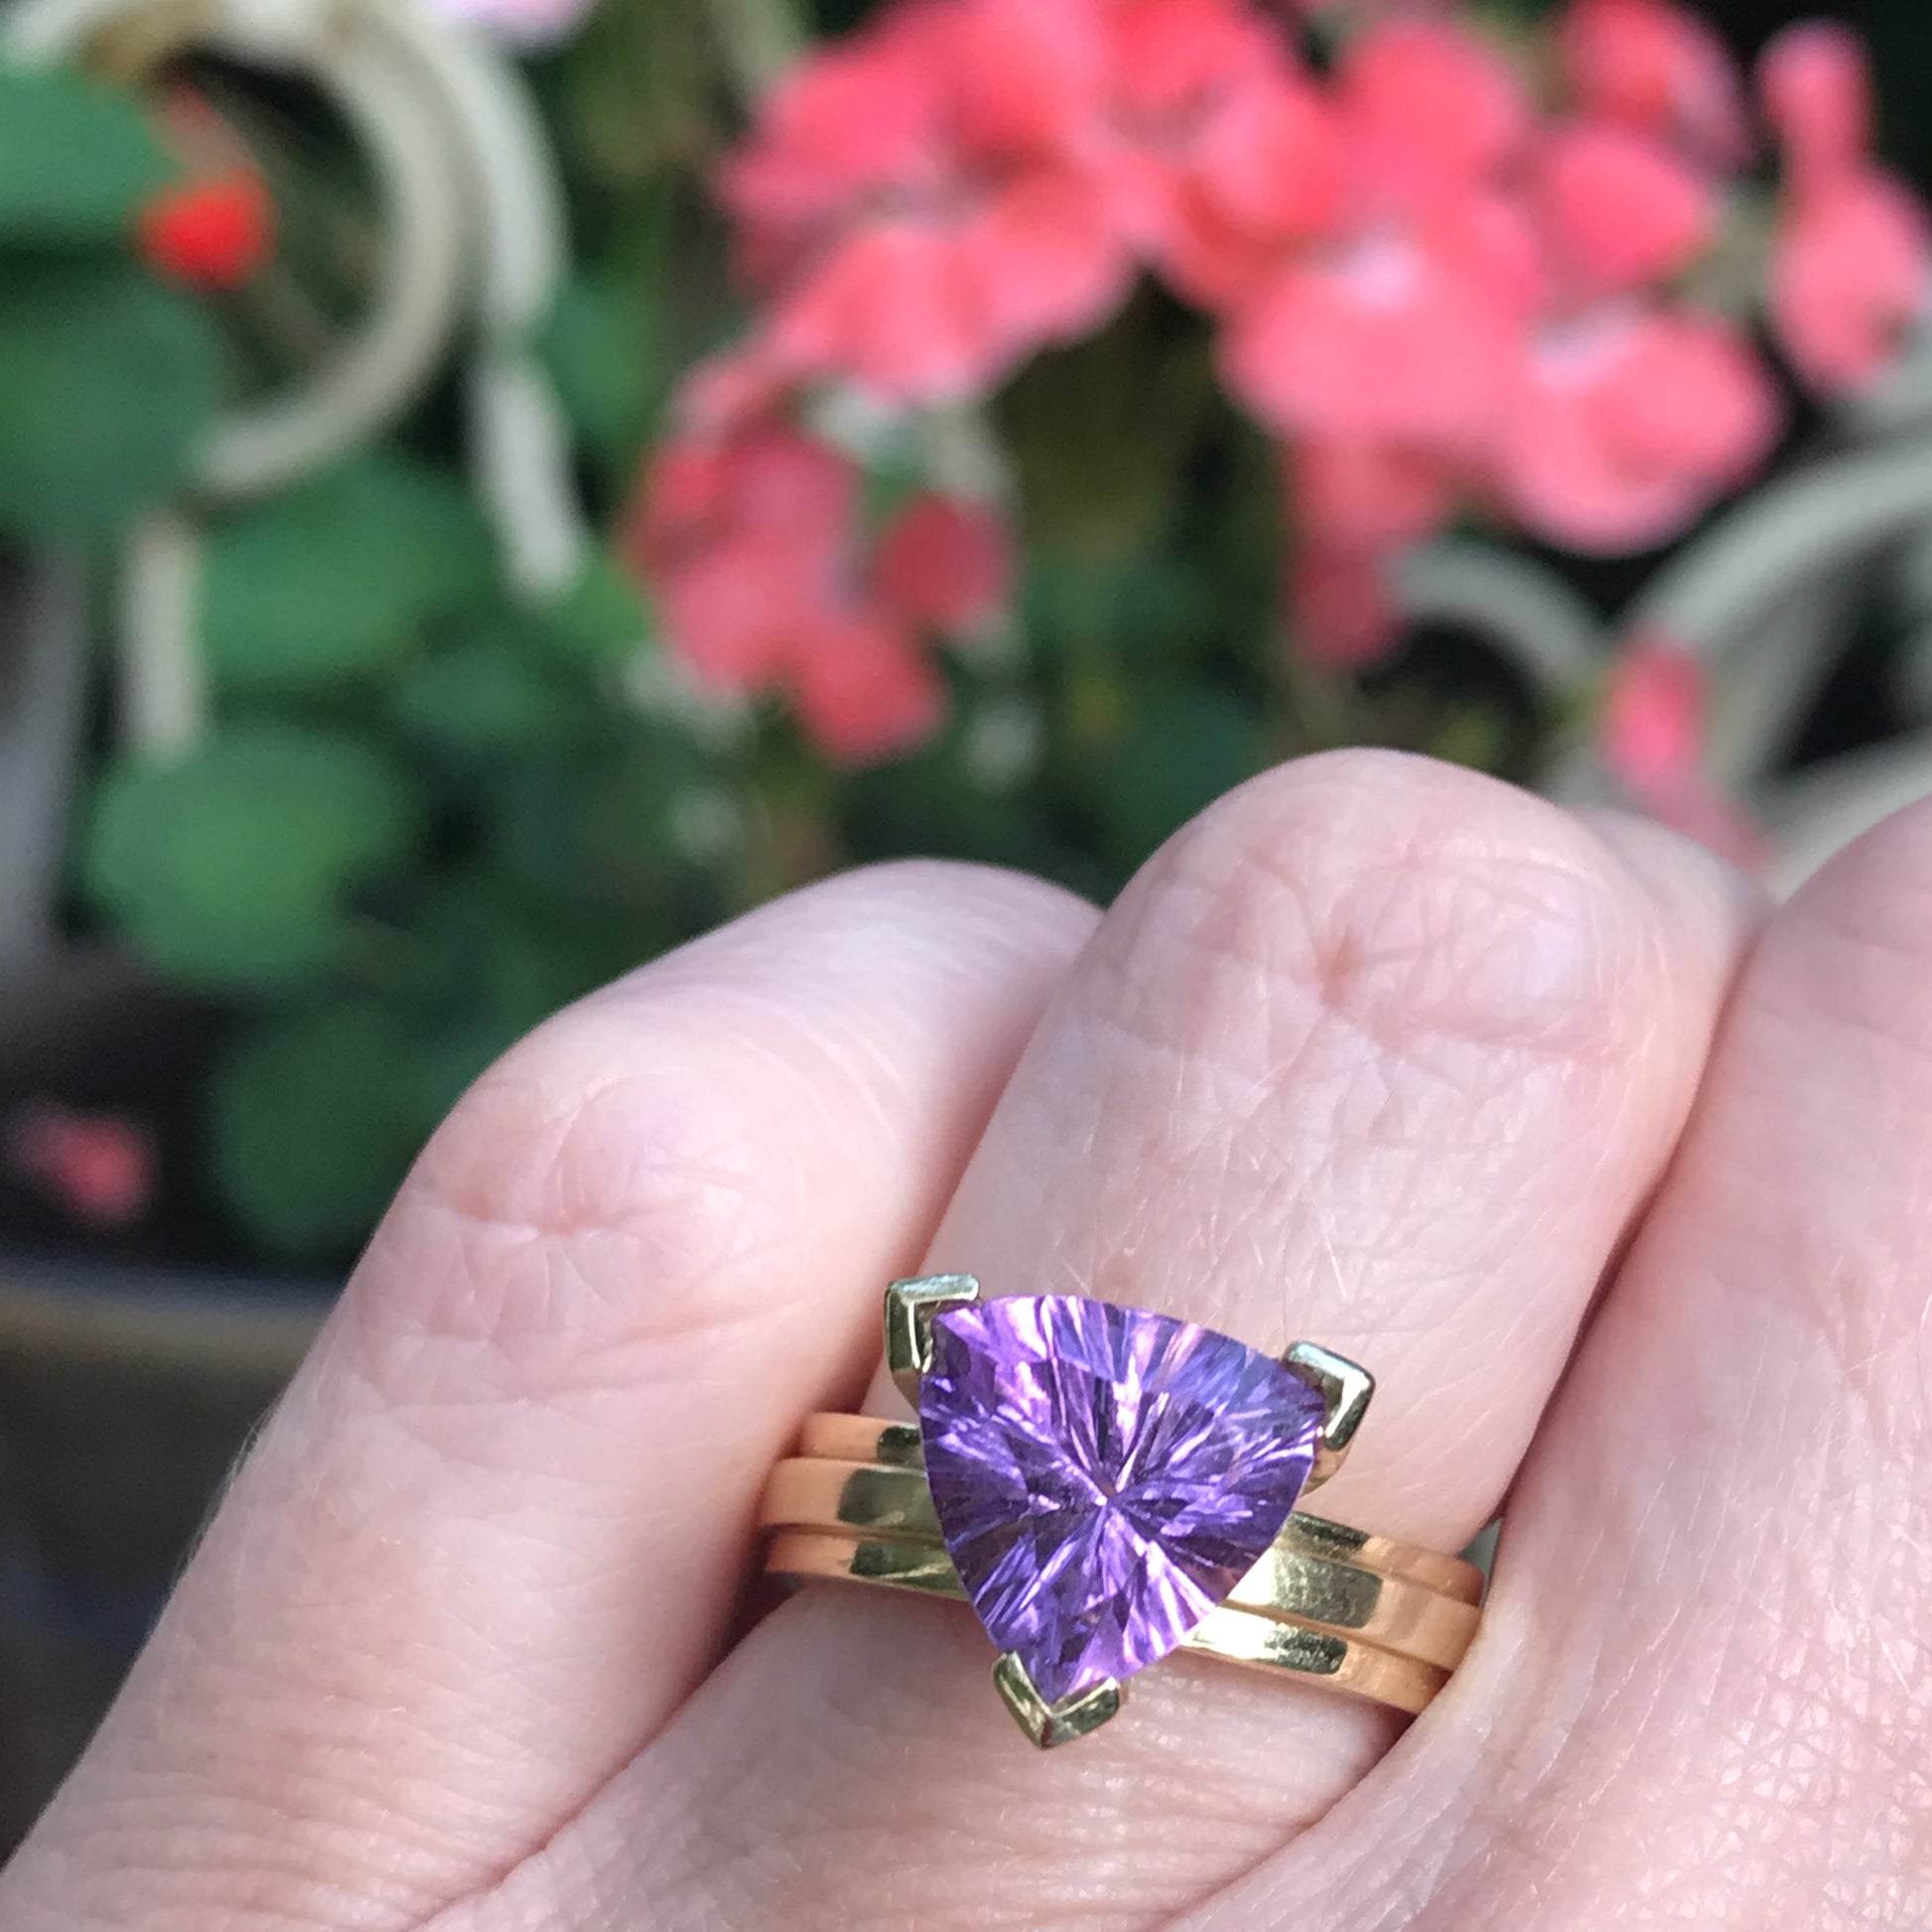 The Candy Wrap ring is made in 18ct yellow gold with a trillion amethyst Ring Rock Lobster   